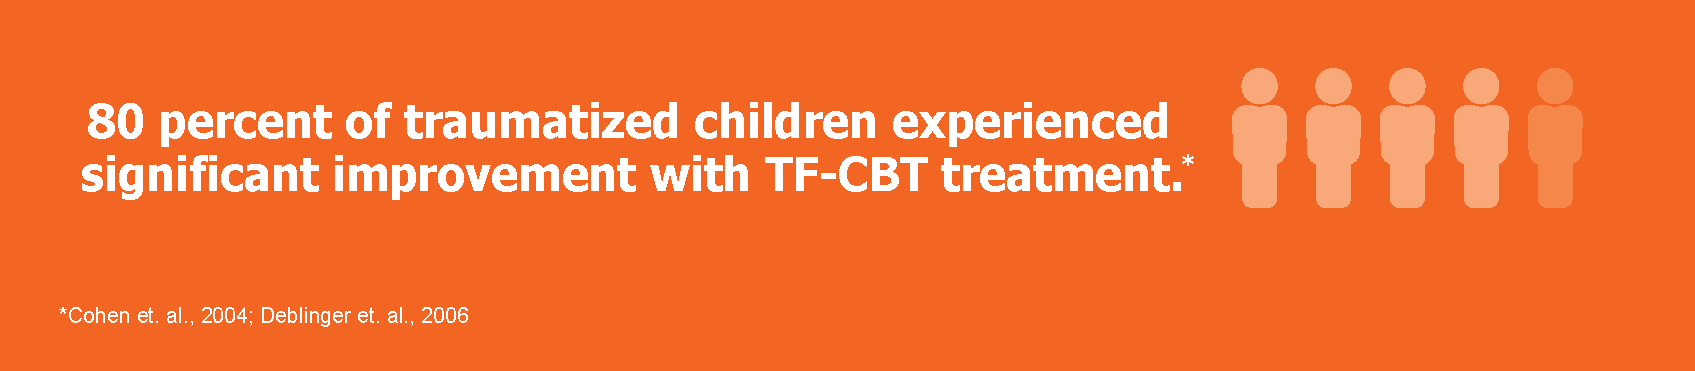 80 percent of traumatized children experienced significant improvement with TF-CBT treatment.